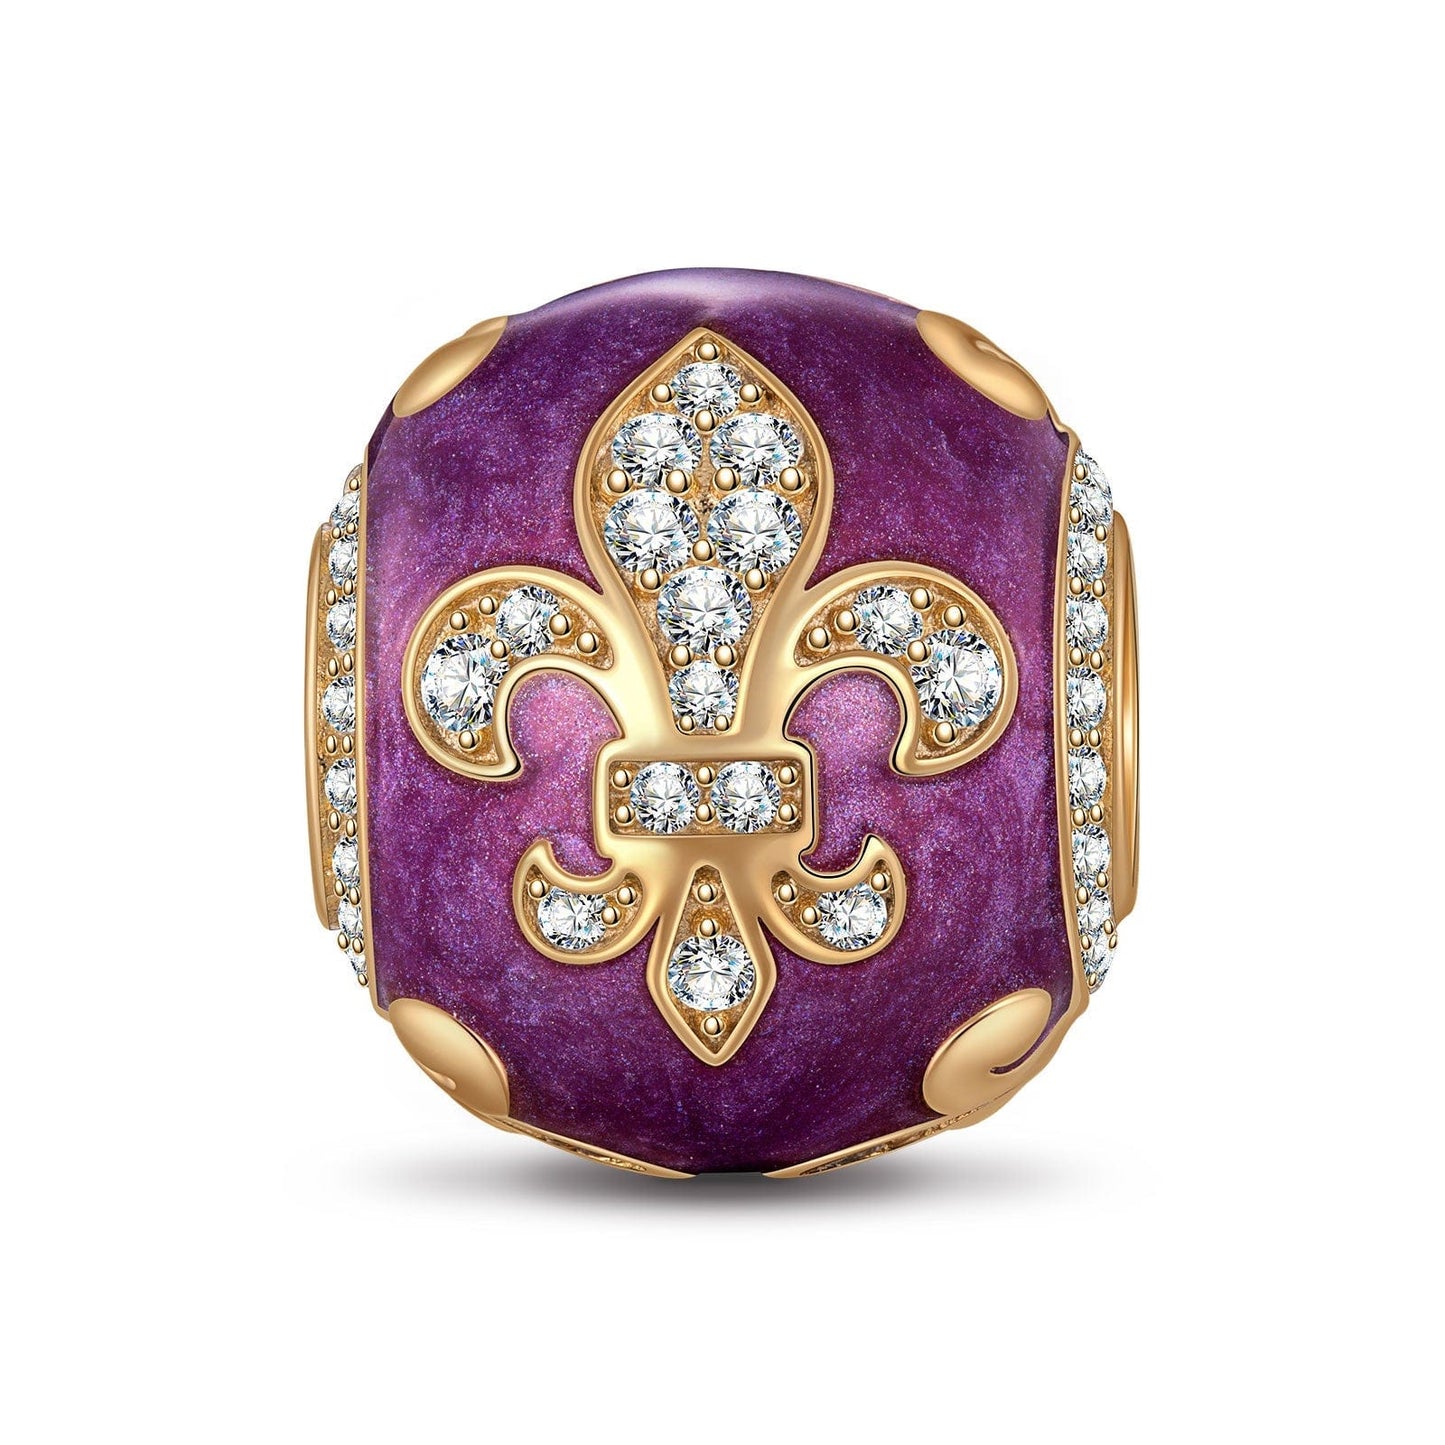 Mulberry Purple Iris Tarnish-resistant Silver Charms With Enamel In 14K Gold Plated